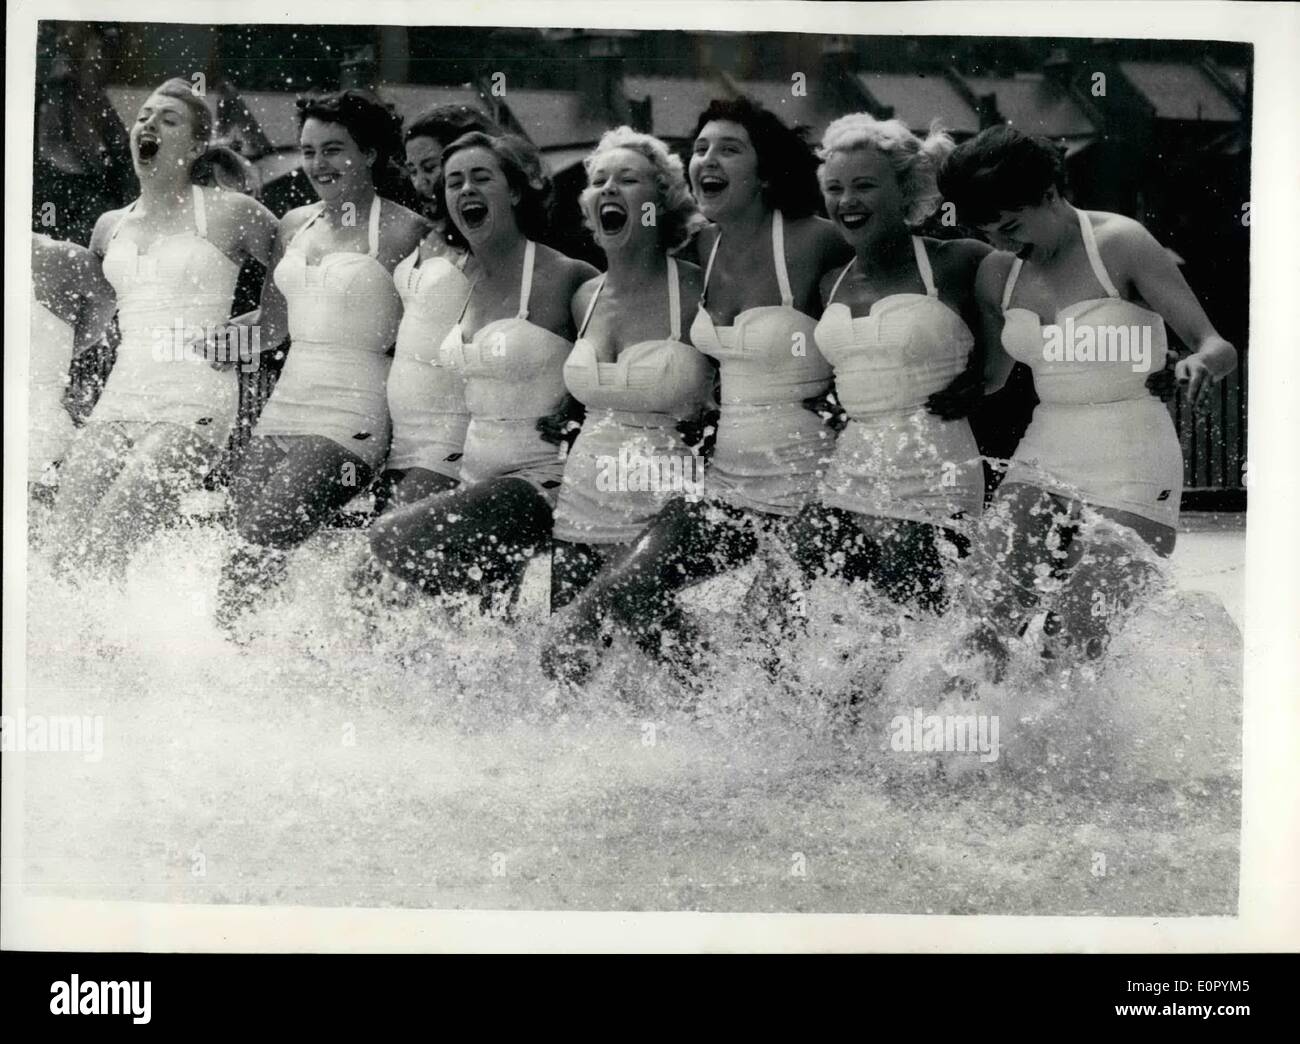 Jul. 07, 1957 - The Commonwealth Aqua Ballet in Training.: Members of the Commonwealth Aqua Ballet Team were to be seen rehearsing at the Nom Sea open air Baths this morning. The girls come from all parts of the Commonwealth and leave - later today for a tour including Rome - Naples and San Rome. Photo shows Members of the Commonwealth Aqua Ballet have fun in the water - during training this morning. Stock Photo